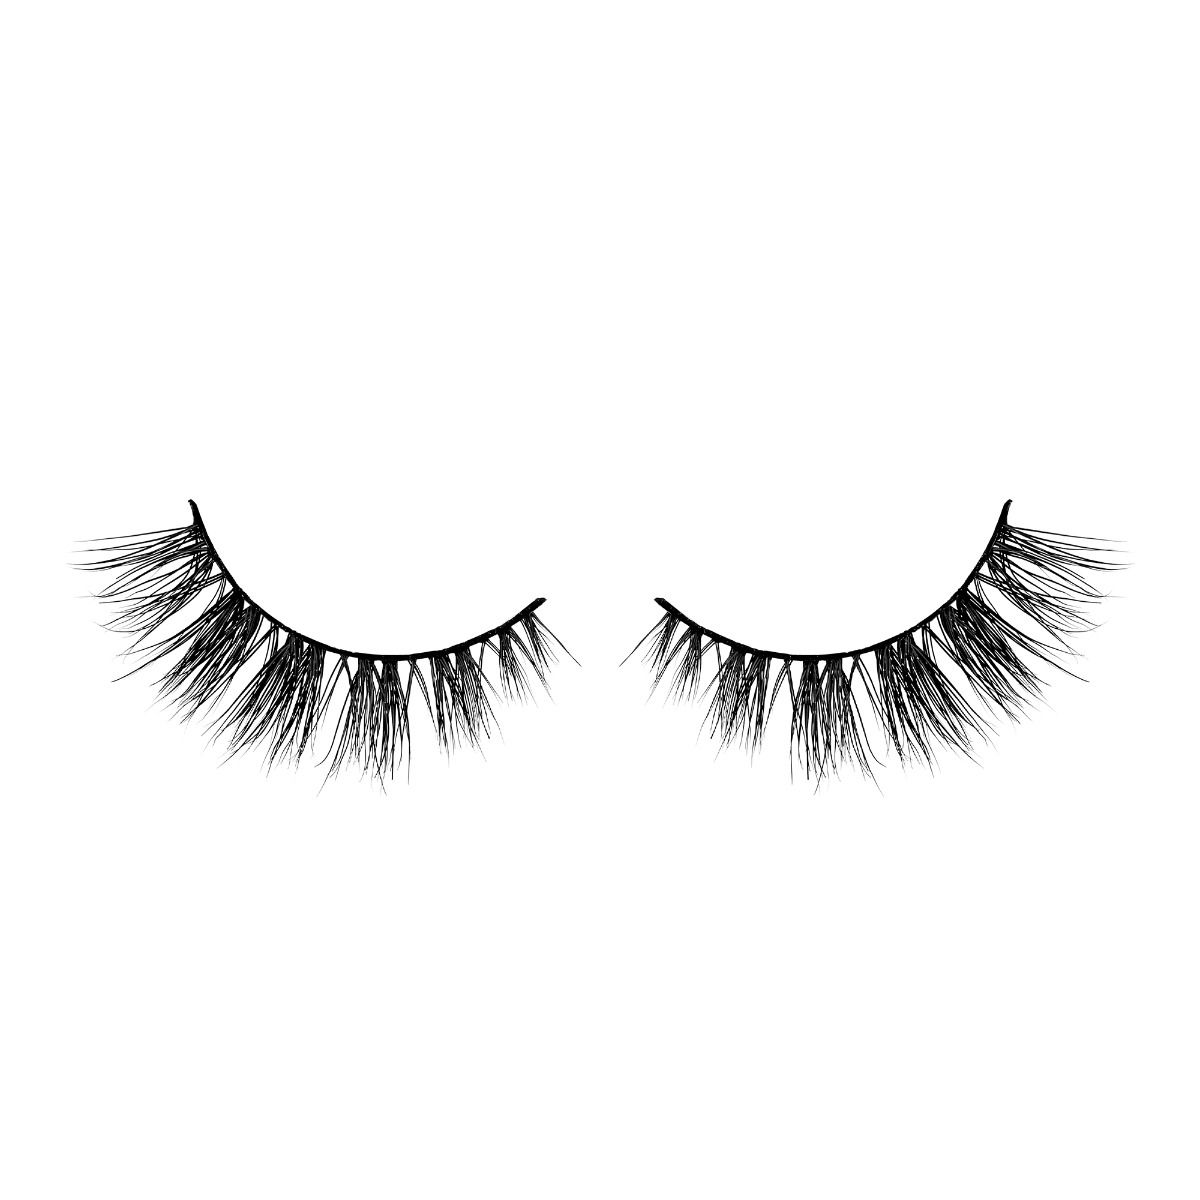 Effortless Collection Lashes - No Drama